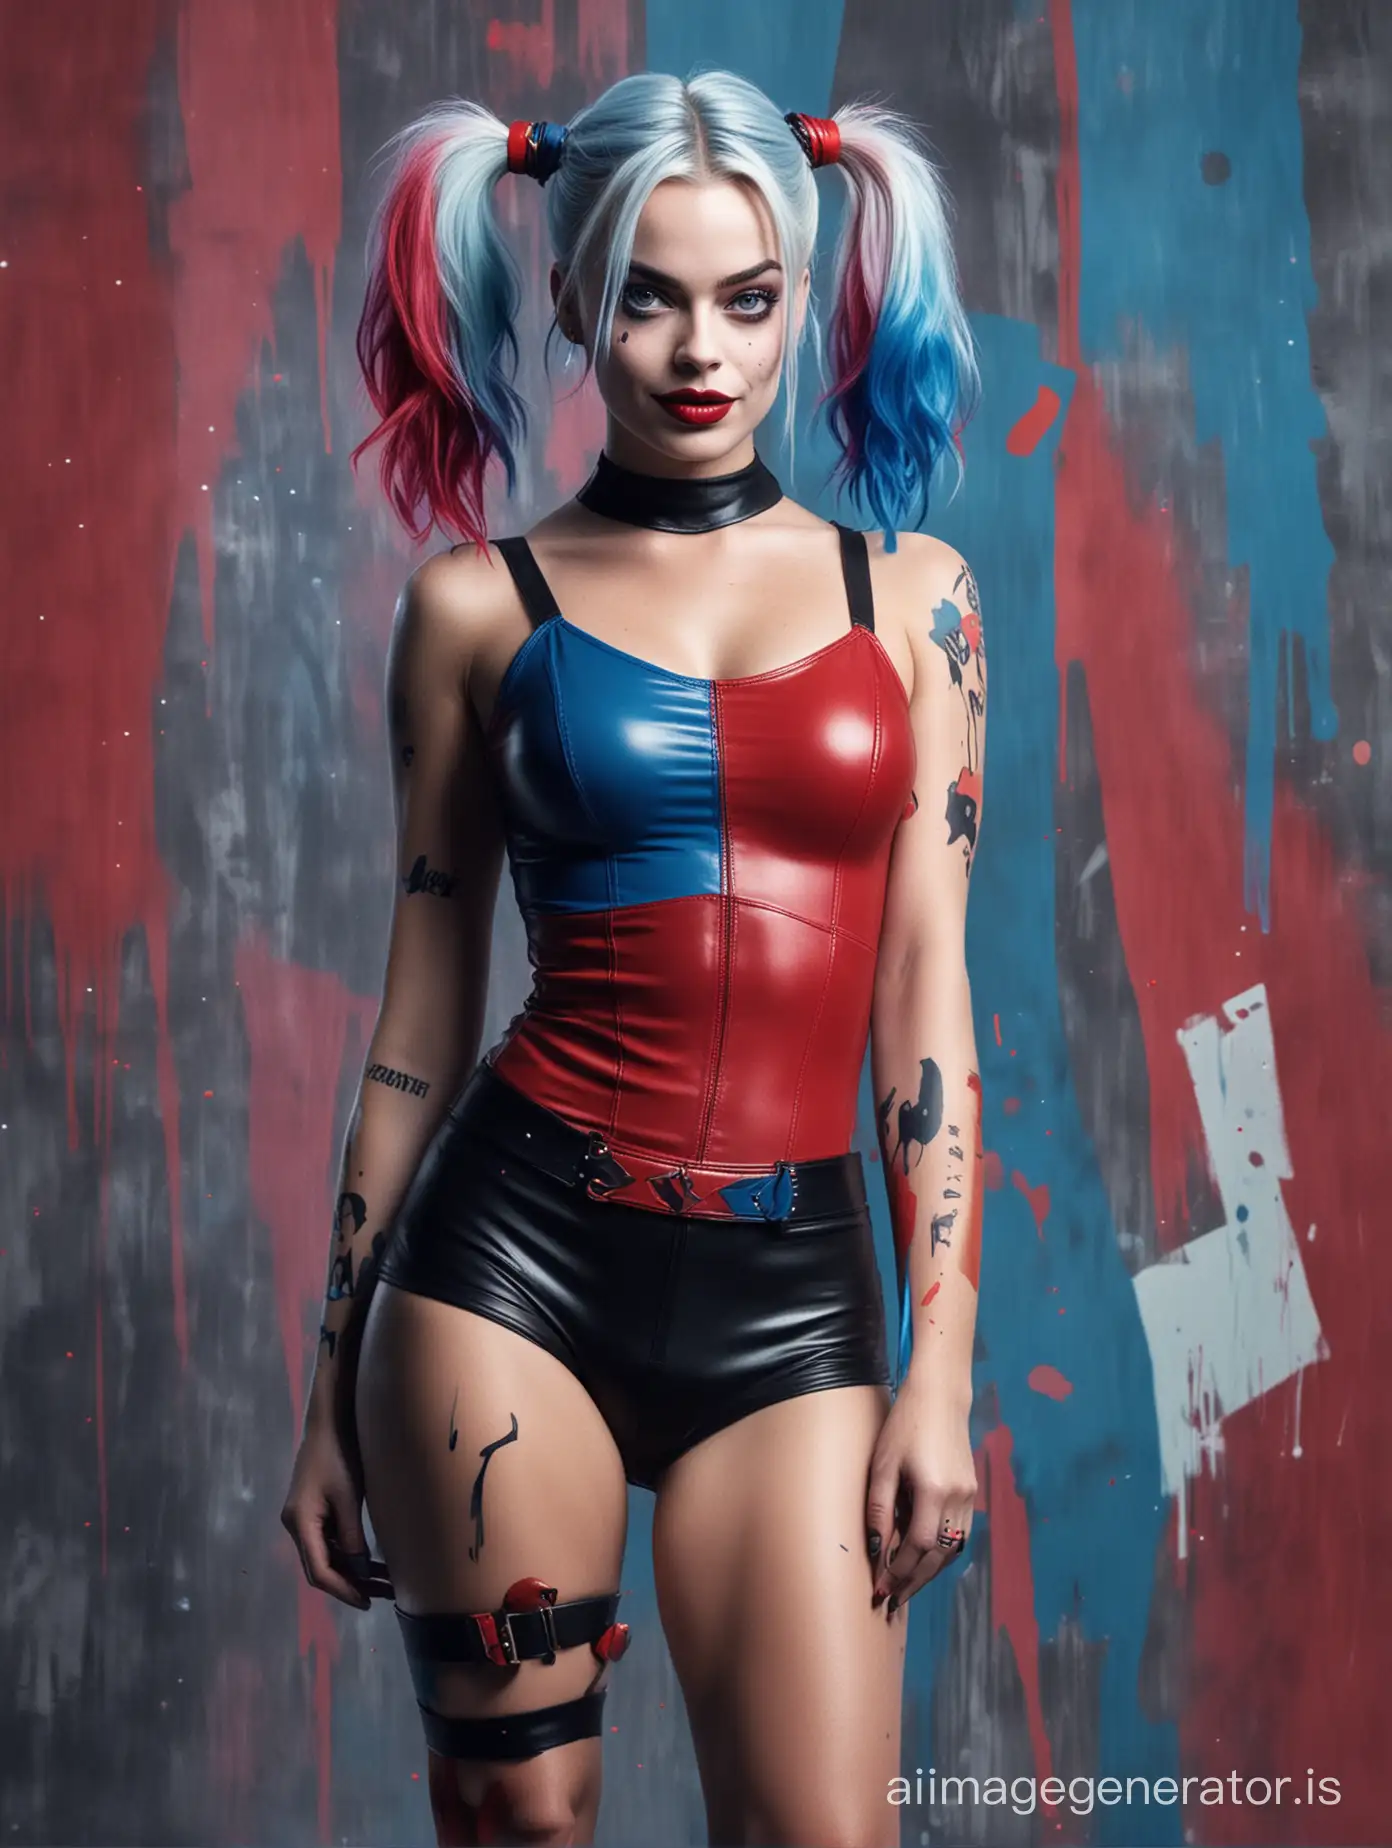 Margot robbie
Harley Quinn
Red blue hair
Abstract background
full Body
